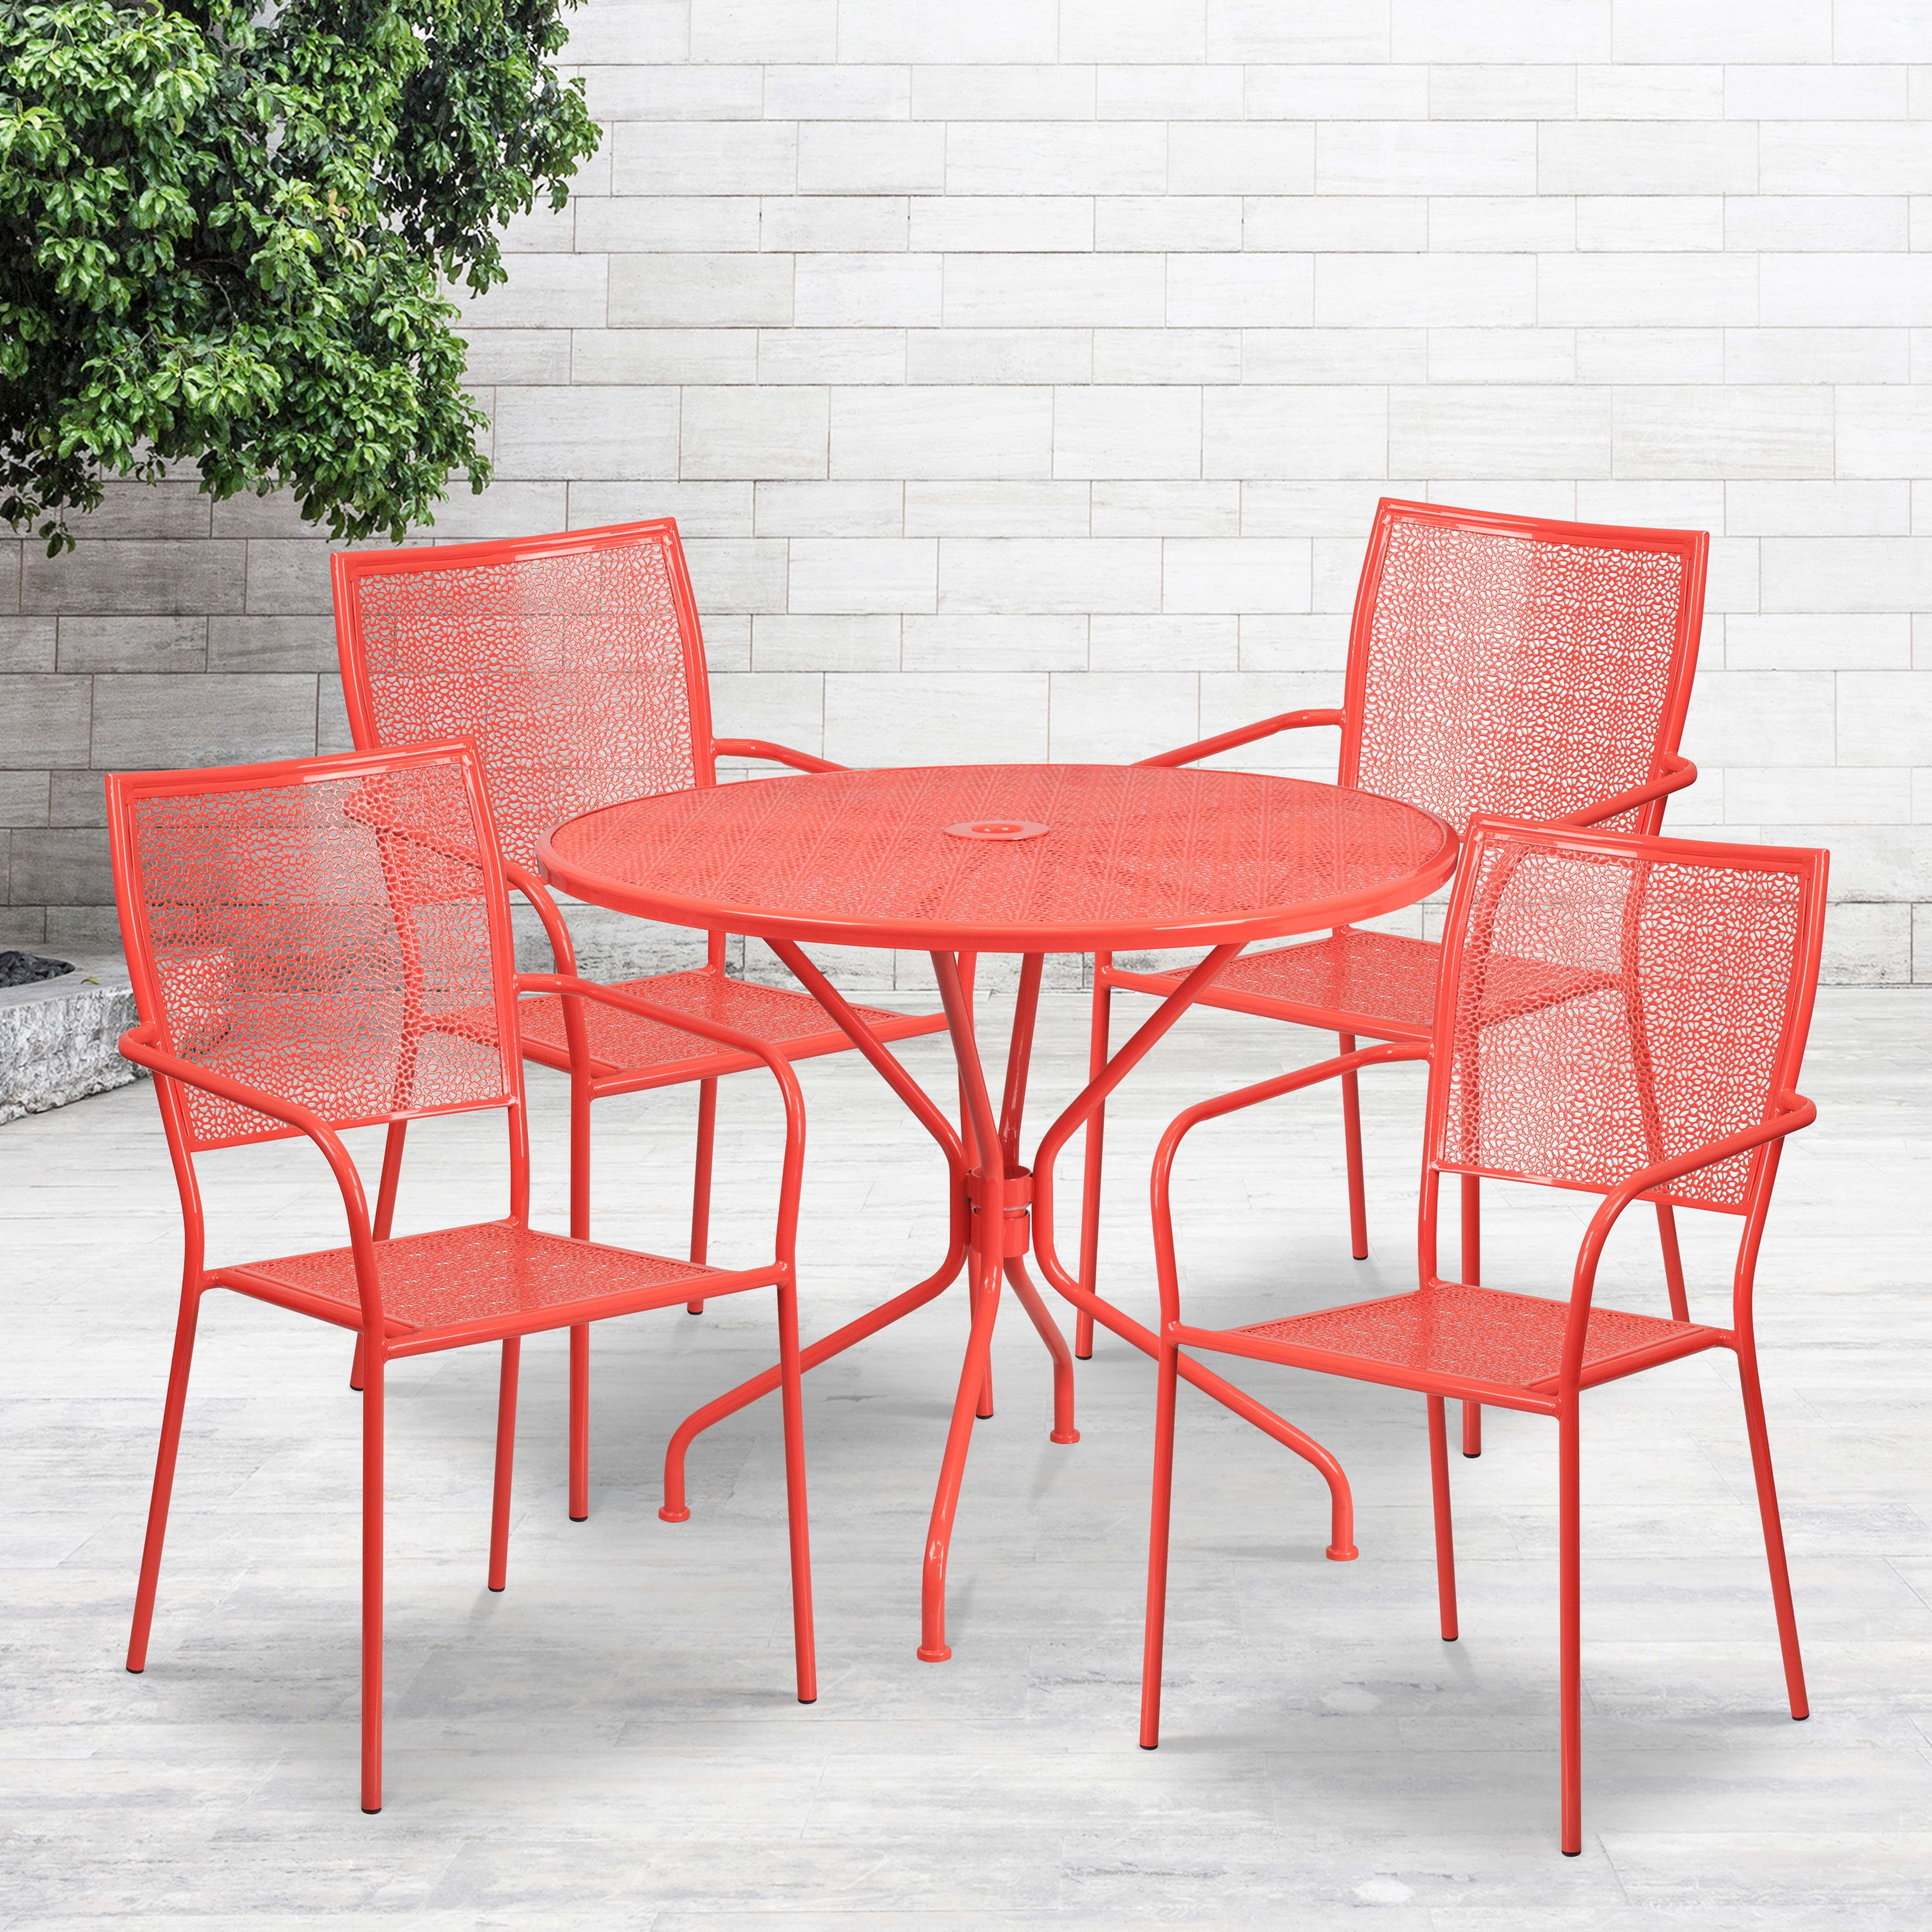 Flash Furniture Commercial Grade 35 25 Round C Indoor Outdoor Steel Patio Table Set With 4 Square Back Chairs Co 35rd 02chr4 Red Gg Com - Indoor Outdoor Patio Set